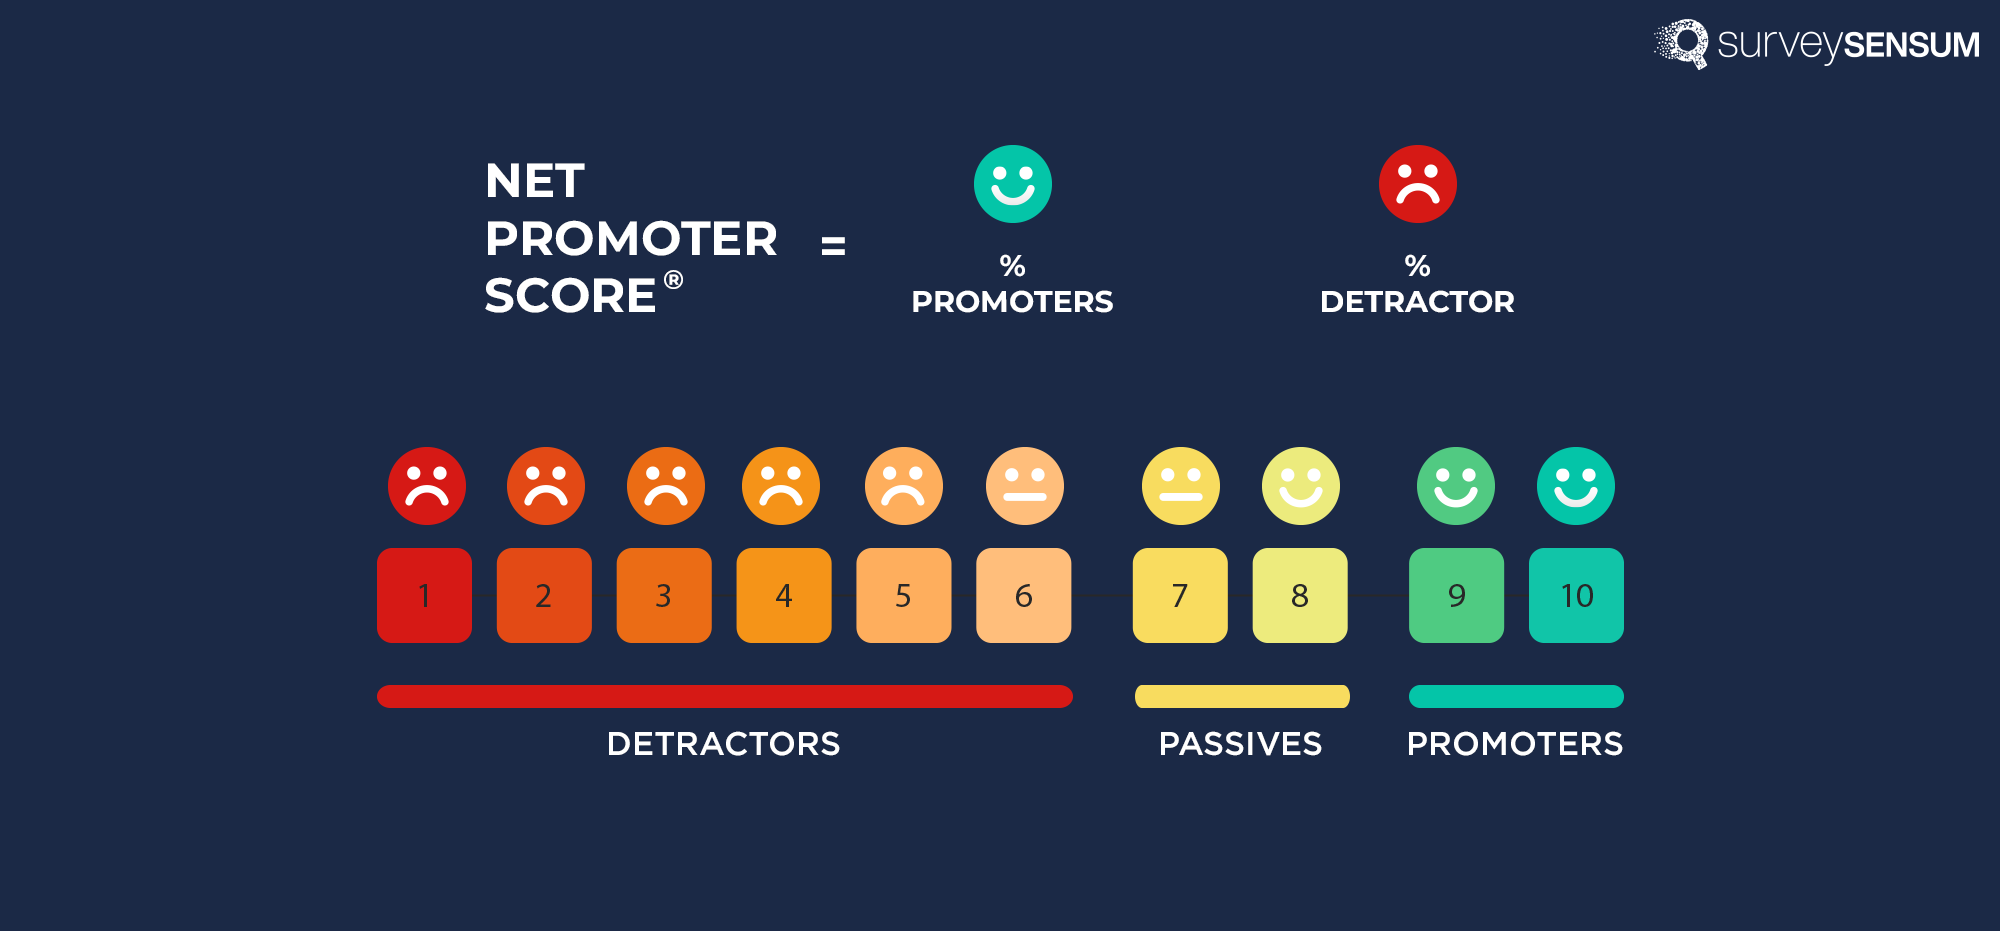 The image shows the net promoter score formula. Here NPS is calculated by subtracting the percentage of promoters from the percentage of detractors. % of promoters - % of detractors = NPS score. 